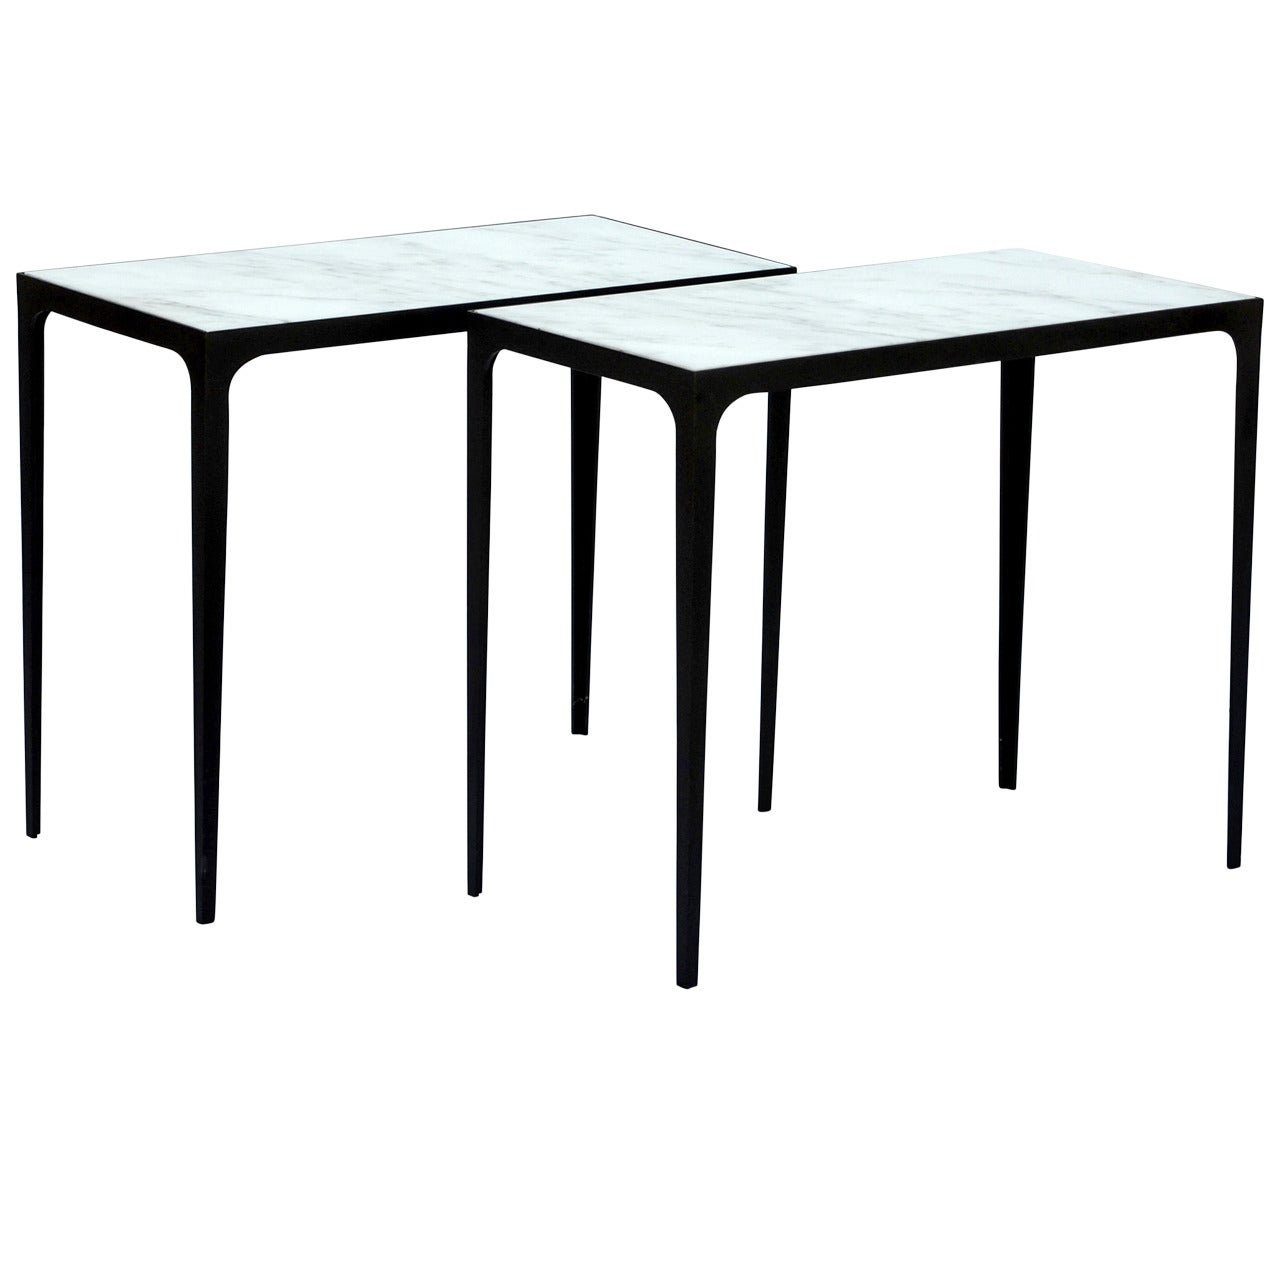 Pair of Chic Blackened Iron and Honed Marble Side Tables